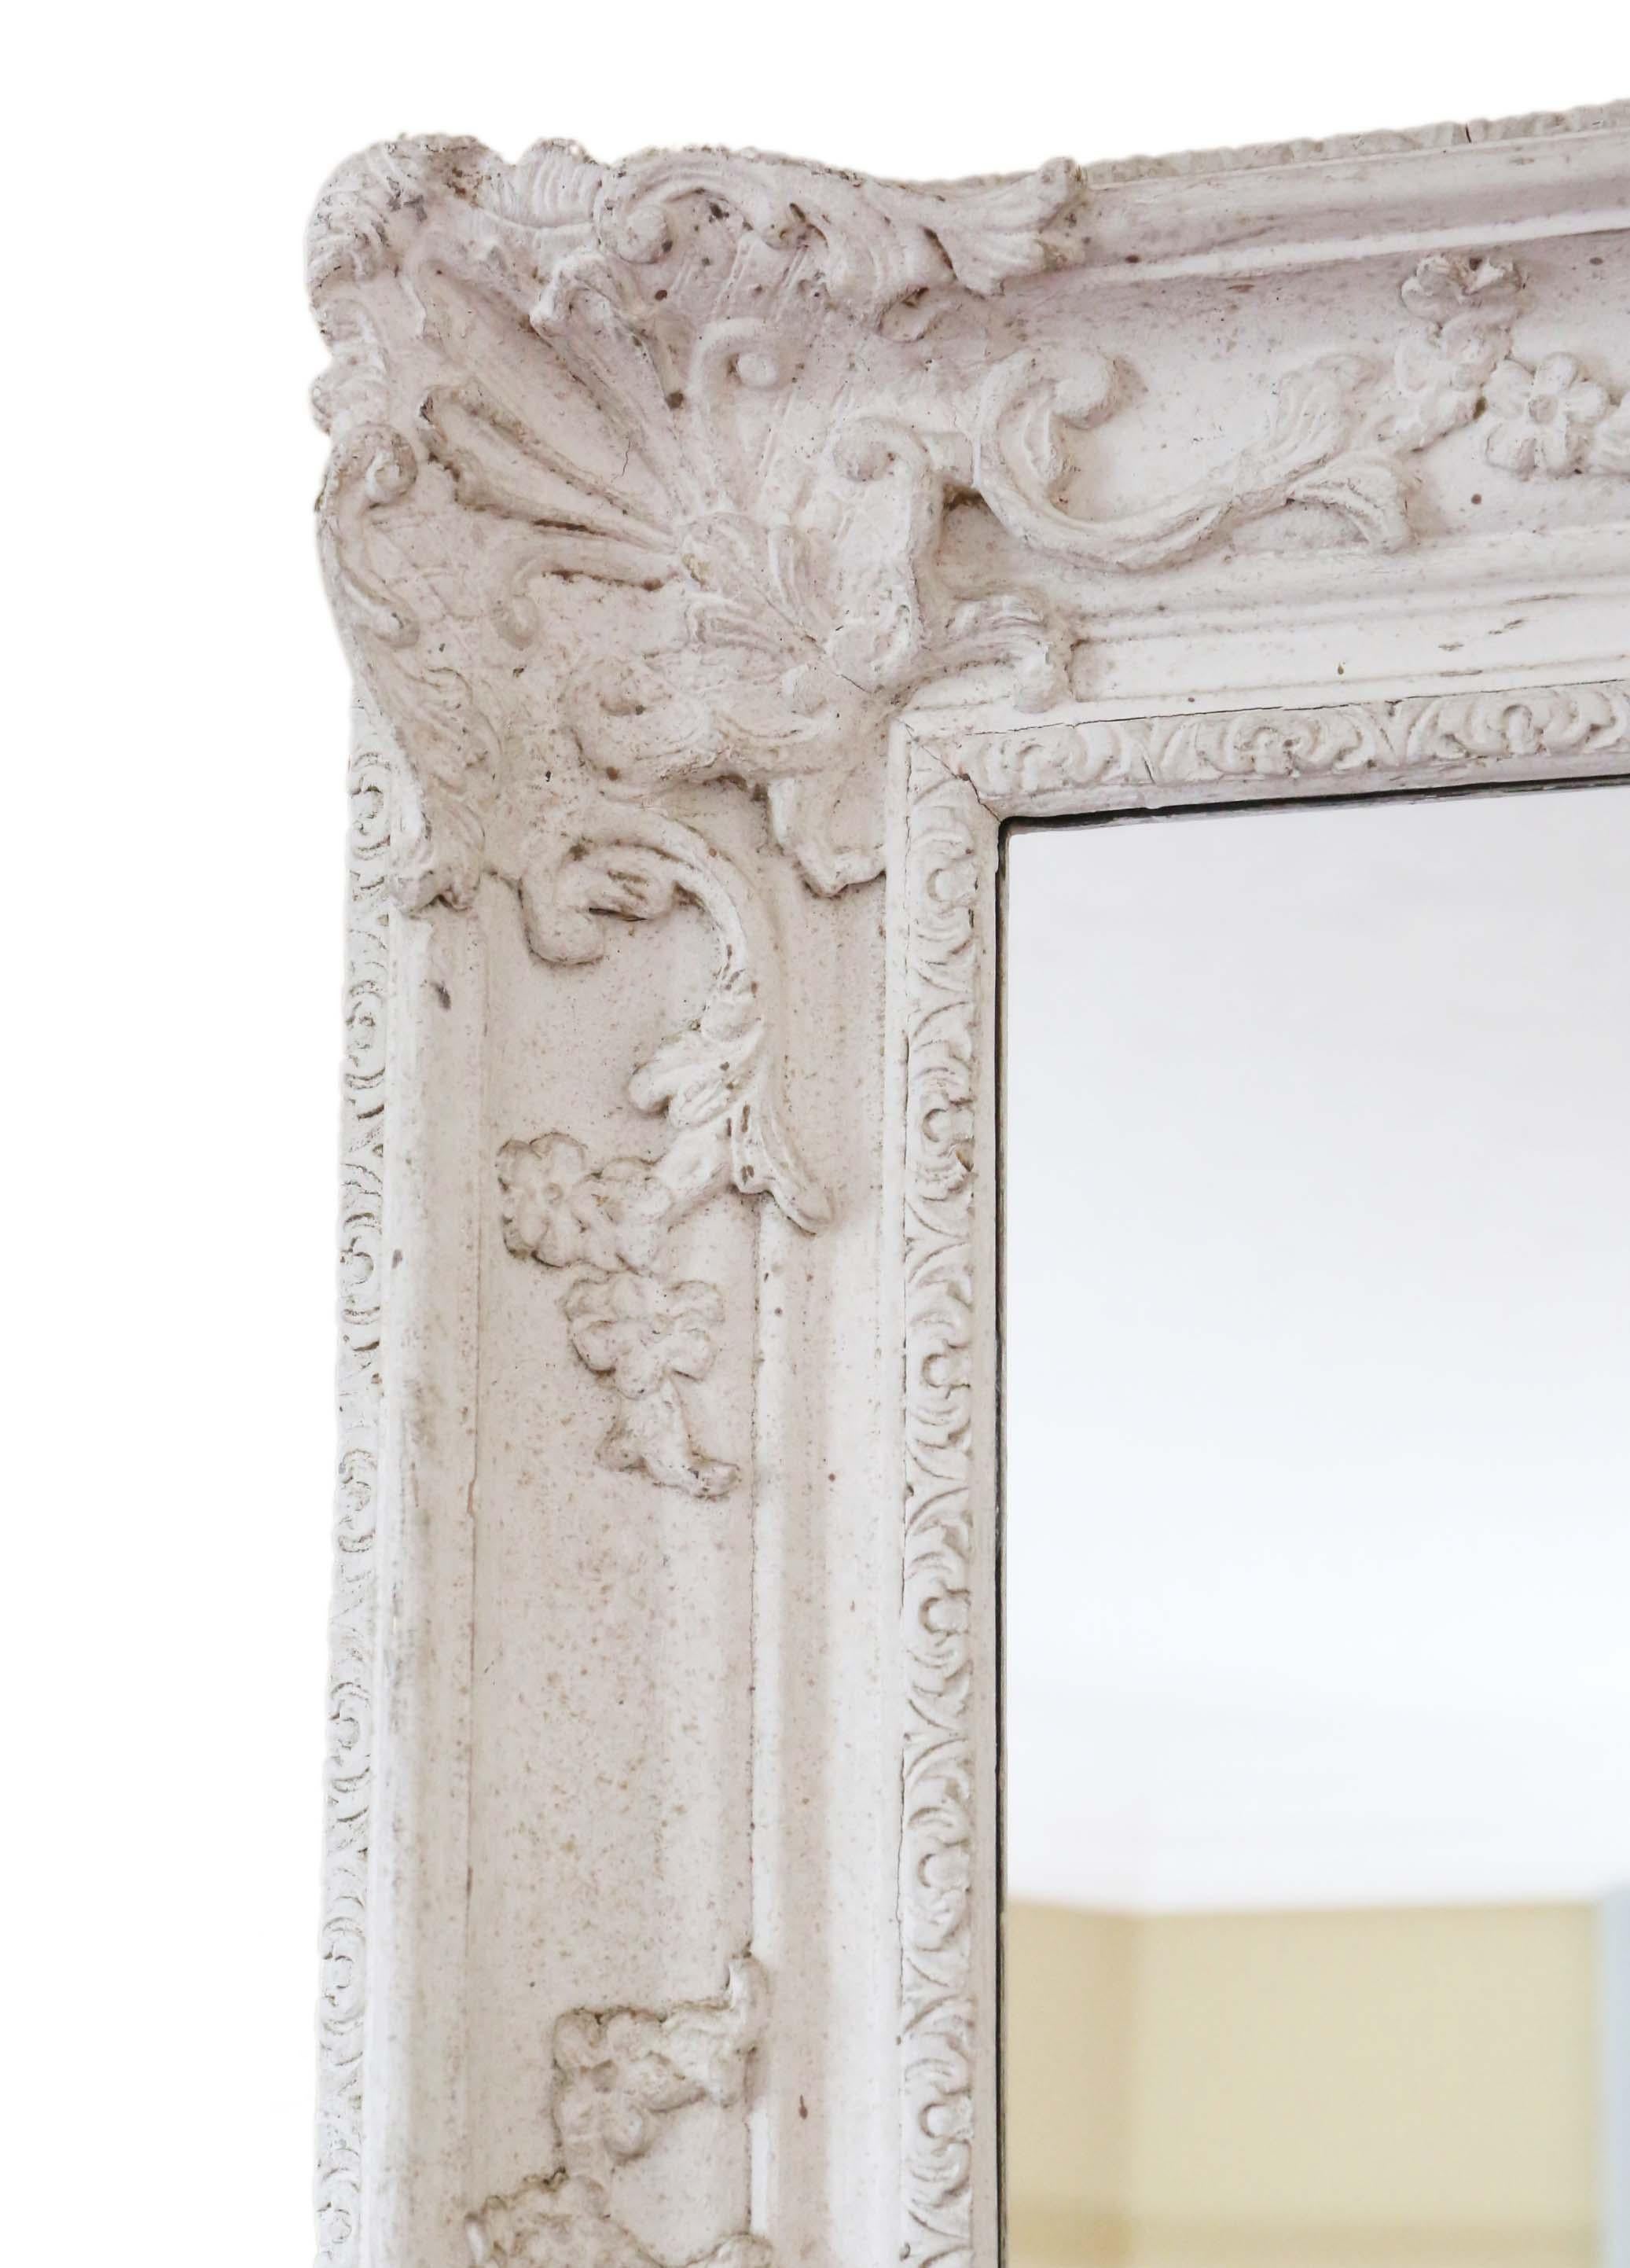 Antique quality large natural gesso (with loads of aging and patination) overmantle or wall mirror, mid 20th Century with lovely charm and elegance. Could be hung in portrait or landscape.

An impressive and rare find, that would look amazing in